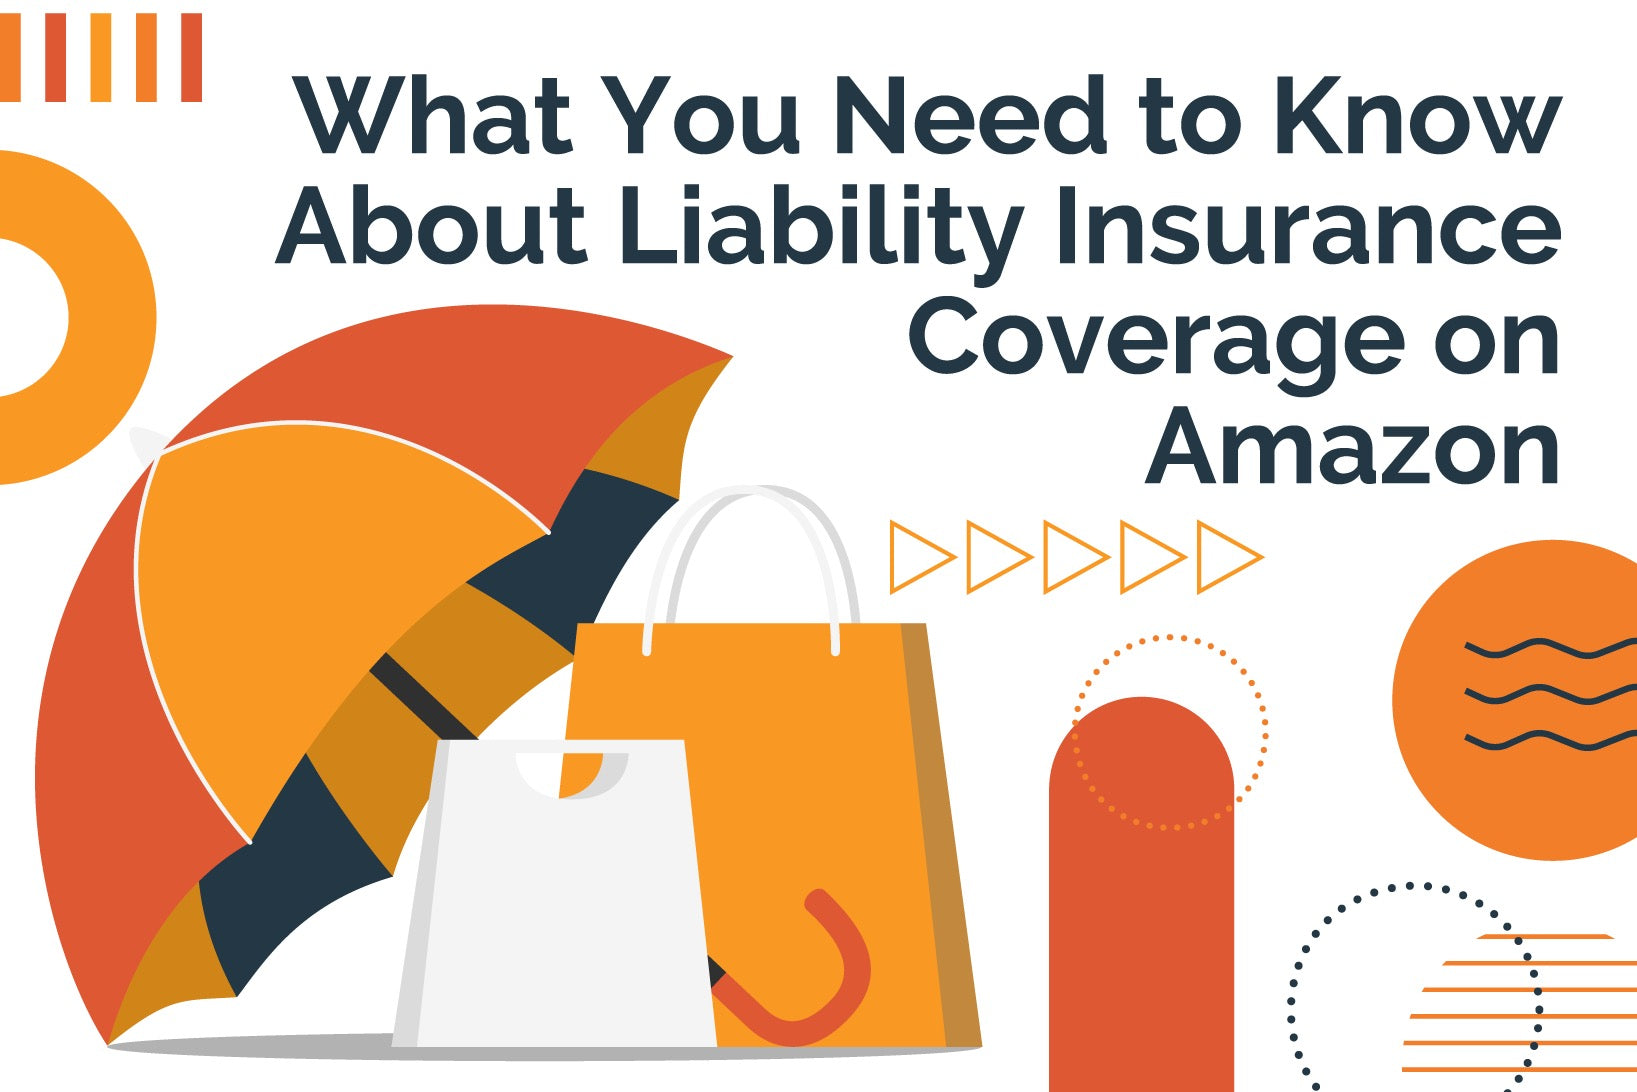 What You Need to Know About Liability Insurance Coverage on Amazon